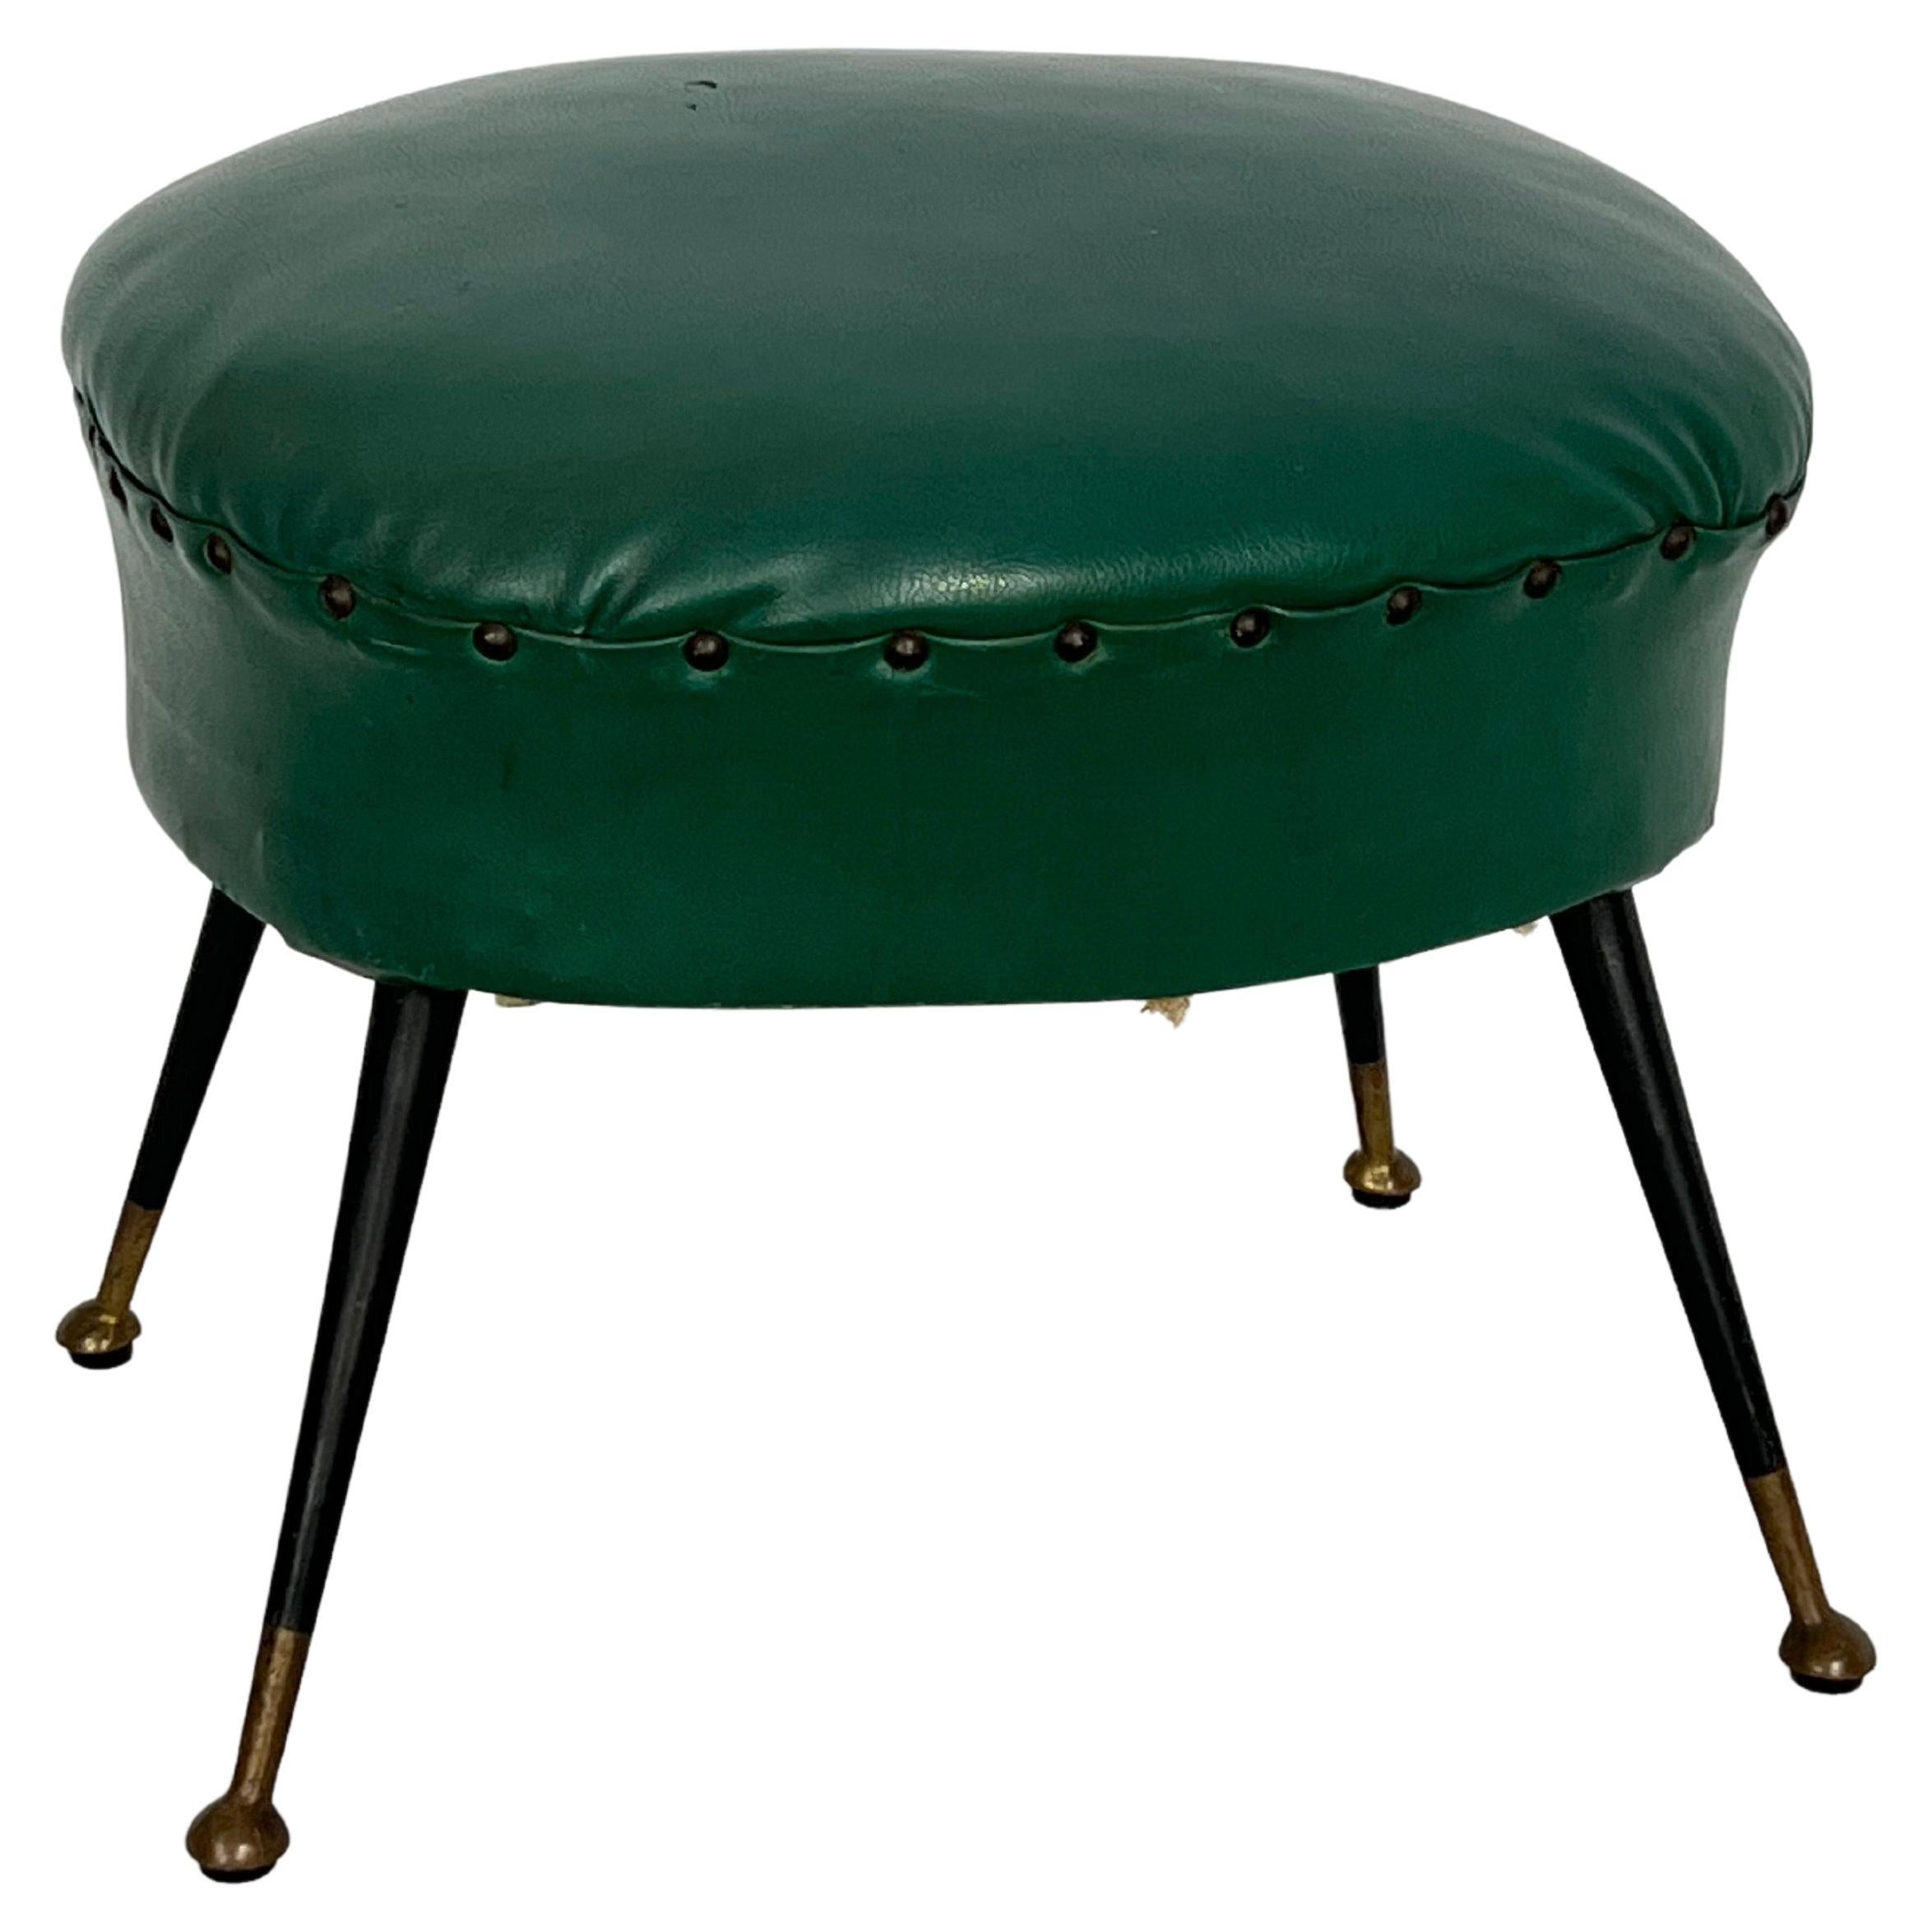 Vintage Italian Green Leatherette Pouf with Brass Feet from 50s